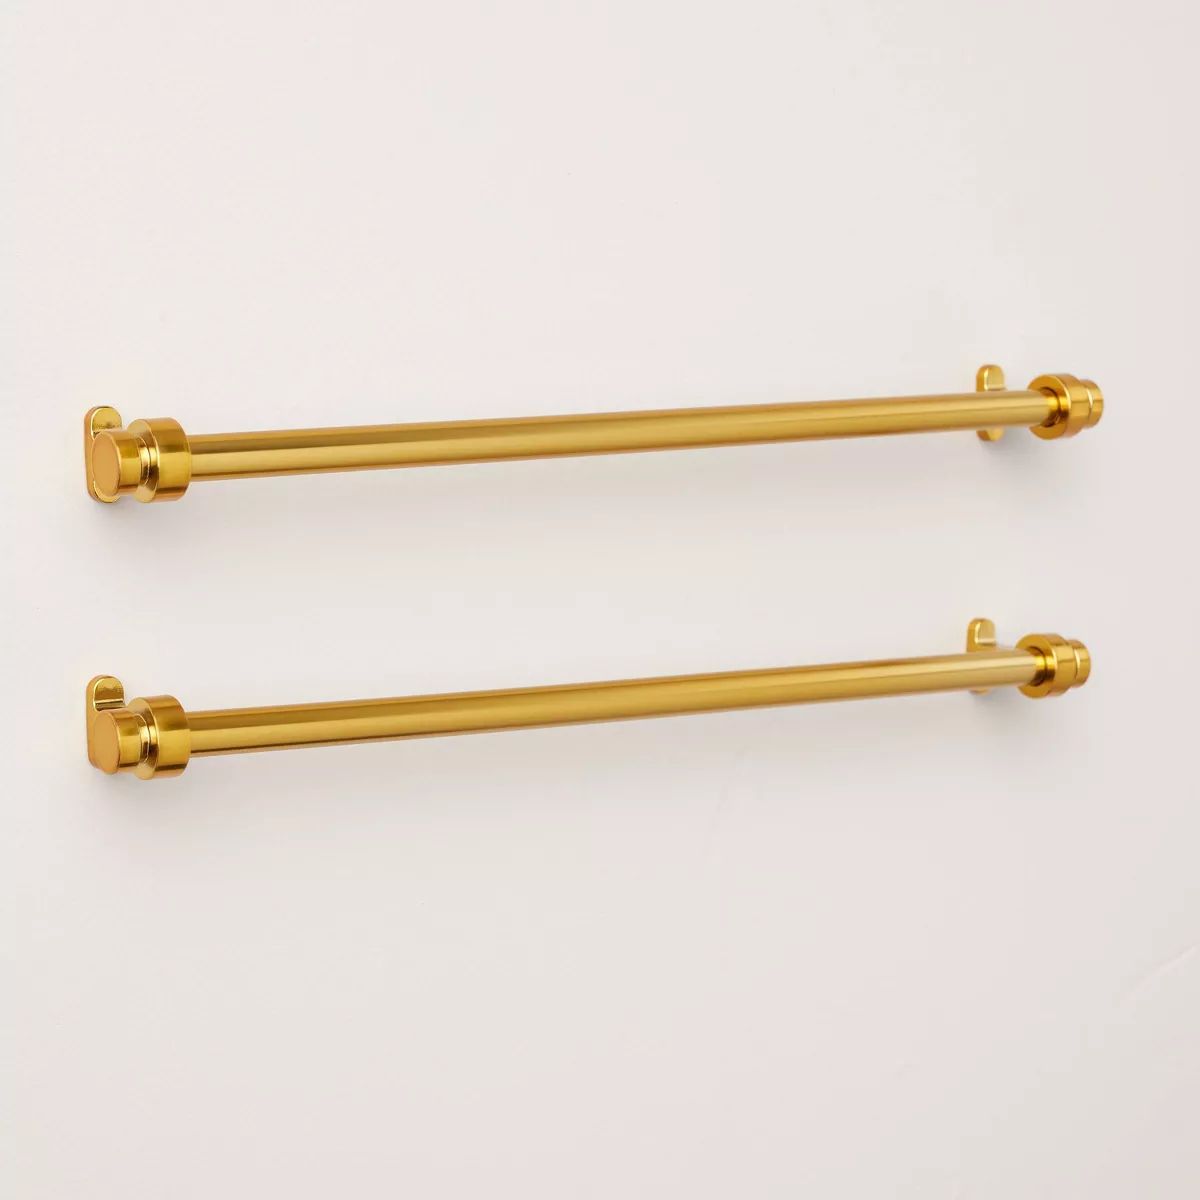 10" Vintage Cuffed Drawer Pulls Brass Plated (Set of 2) - Hearth & Hand™ with Magnolia | Target